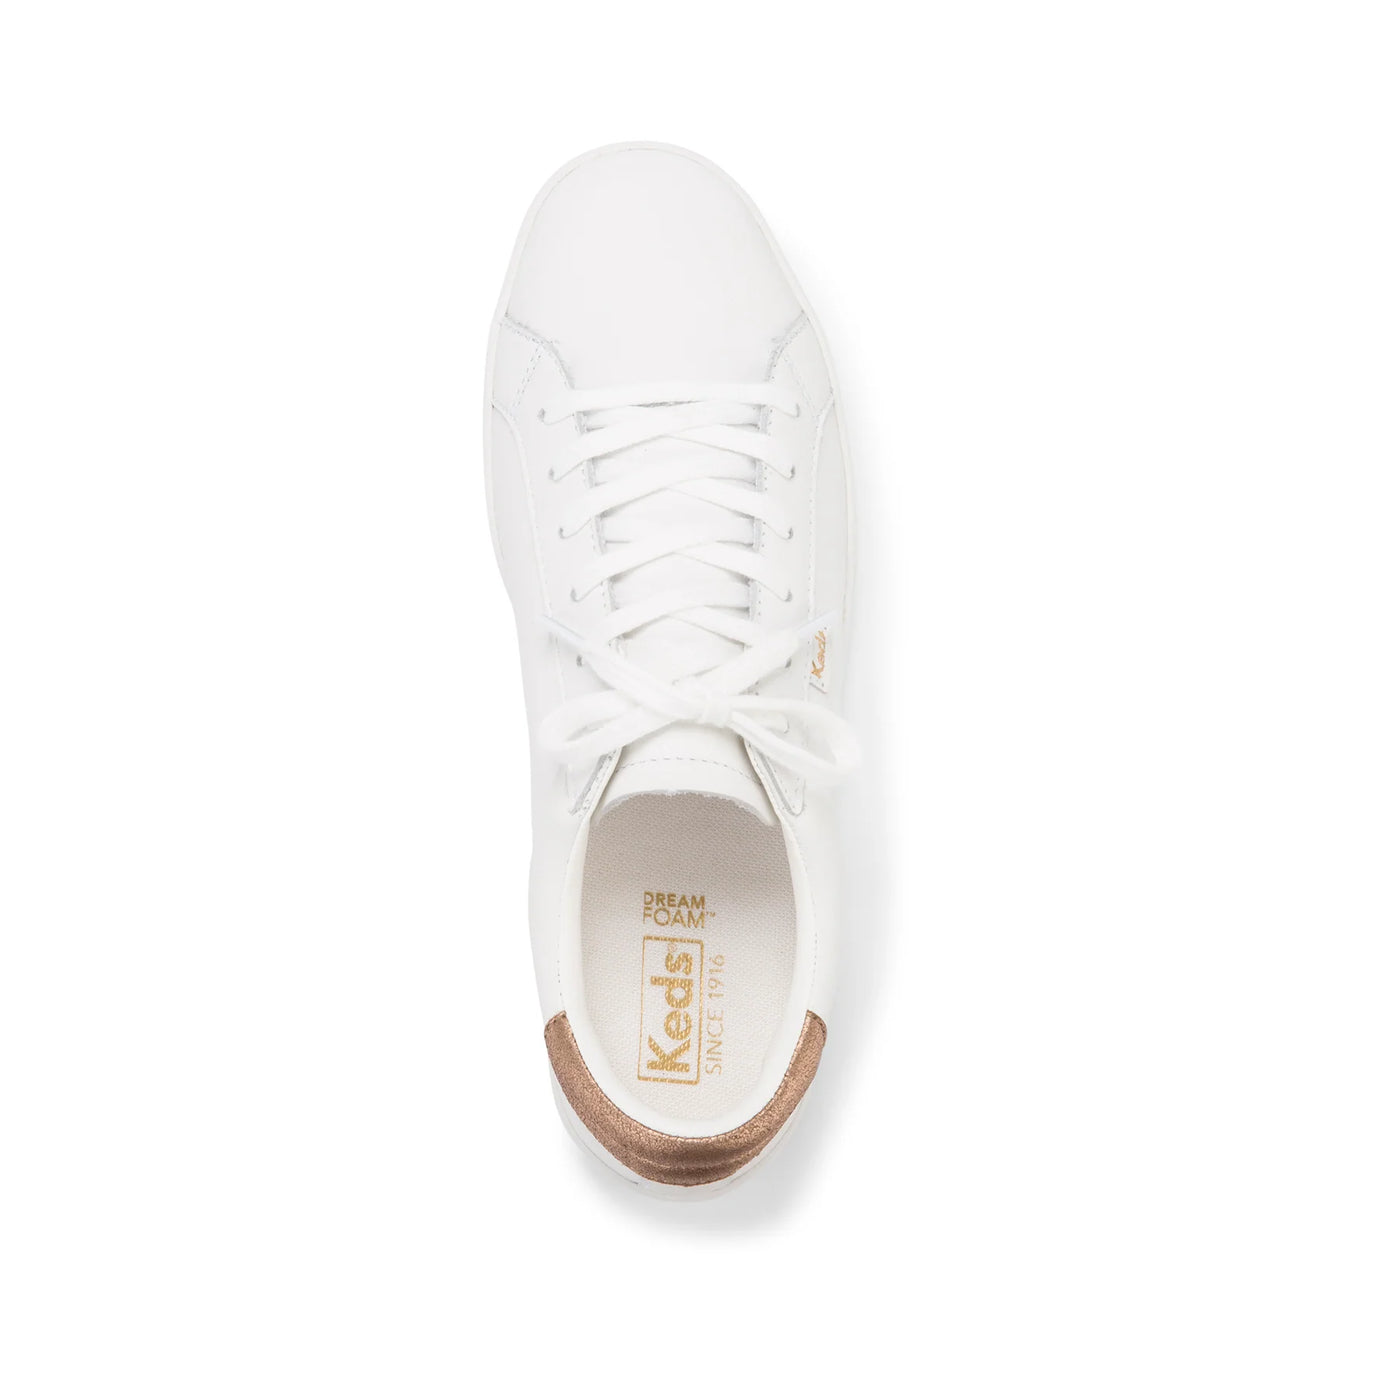 Keds Ace Rose Gold Tab Trainers